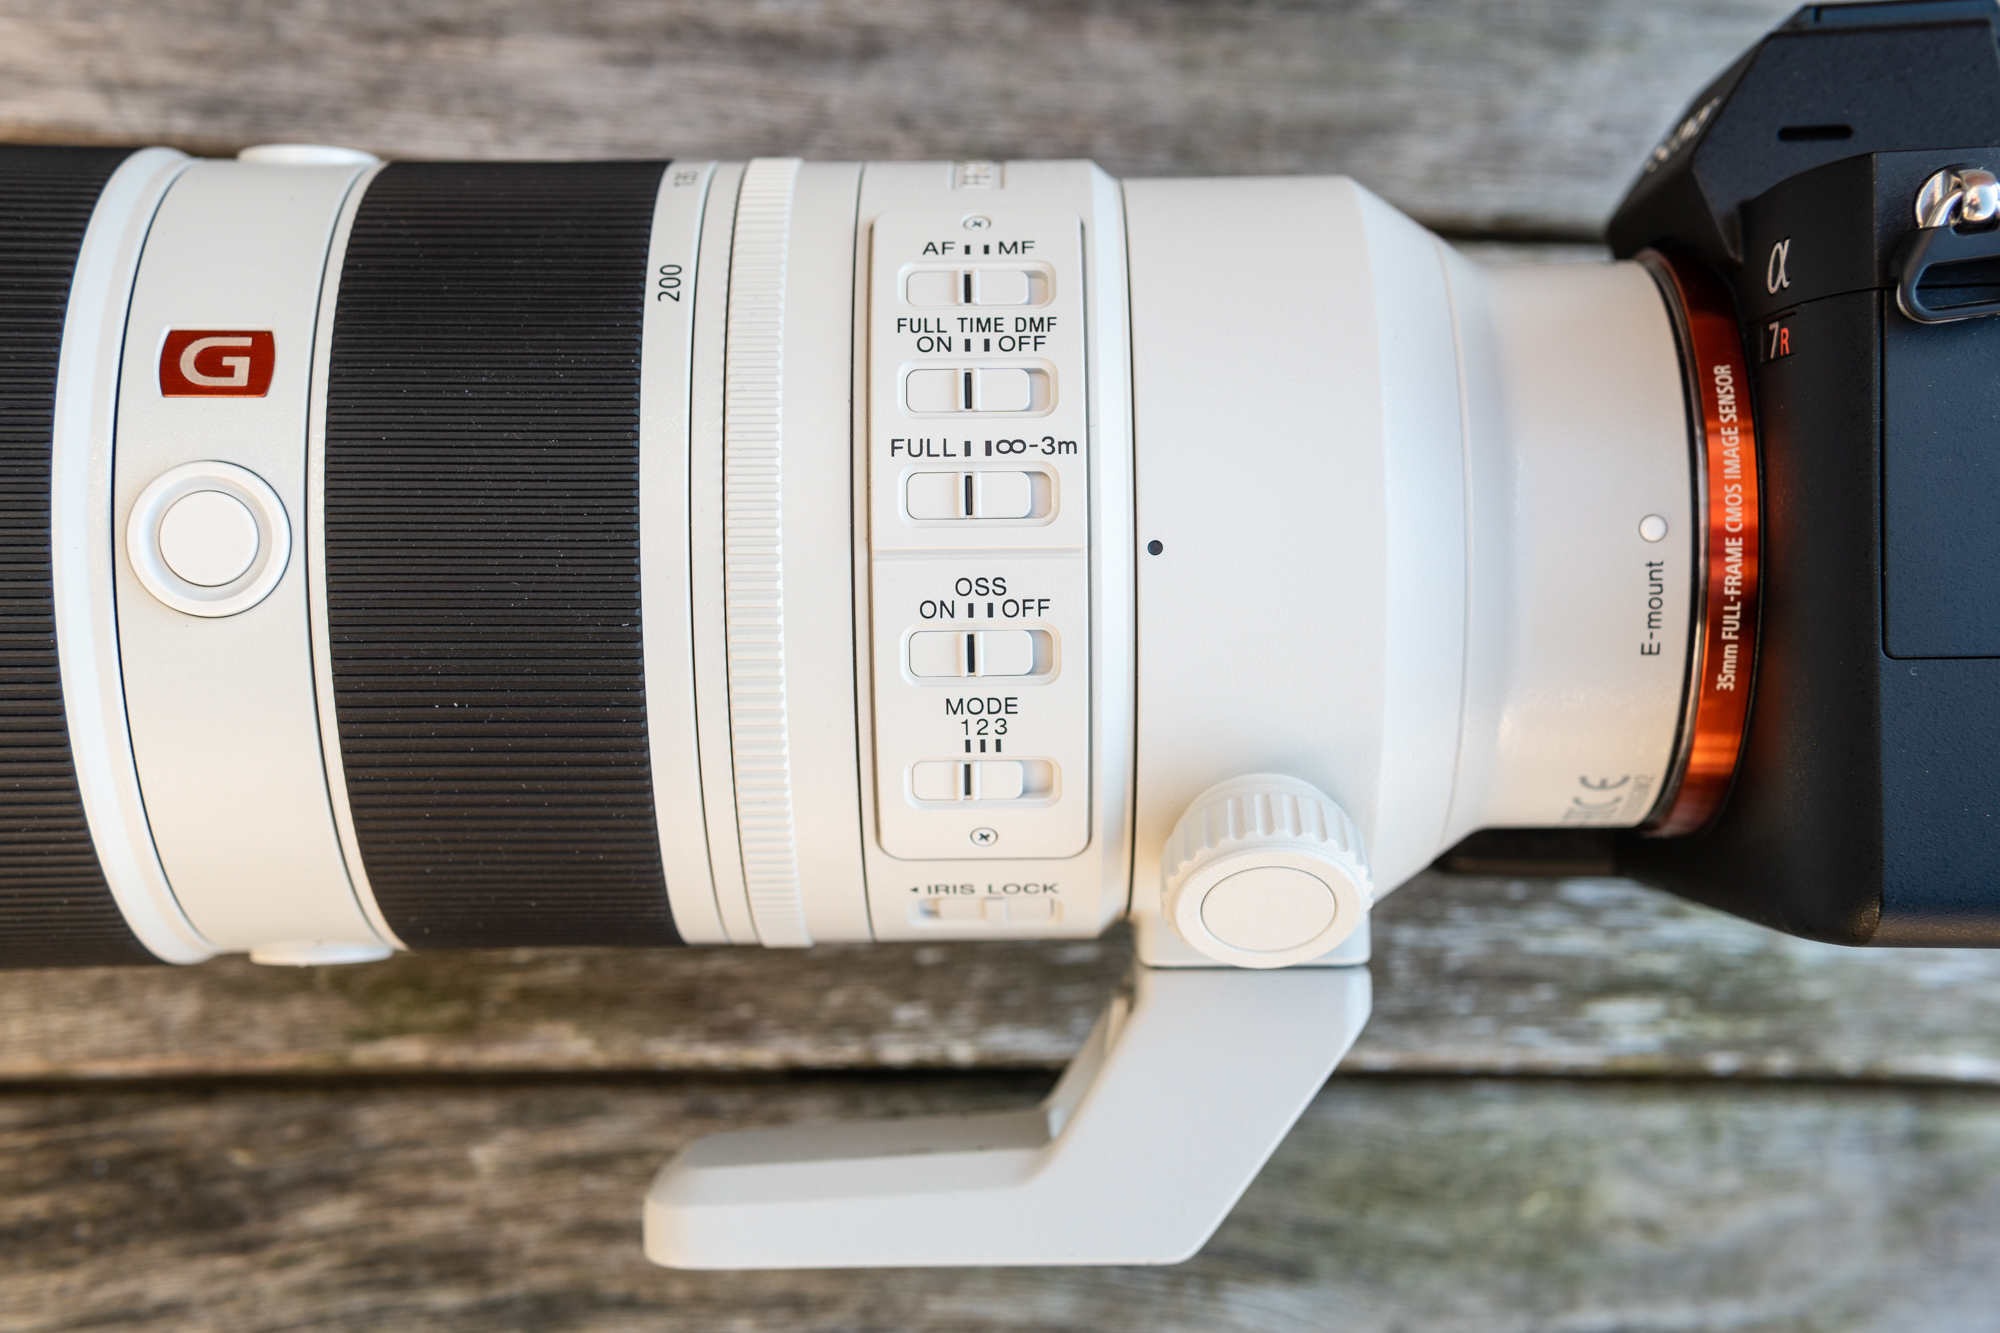 Sony lens close up revealing its controls that include optical stabilization